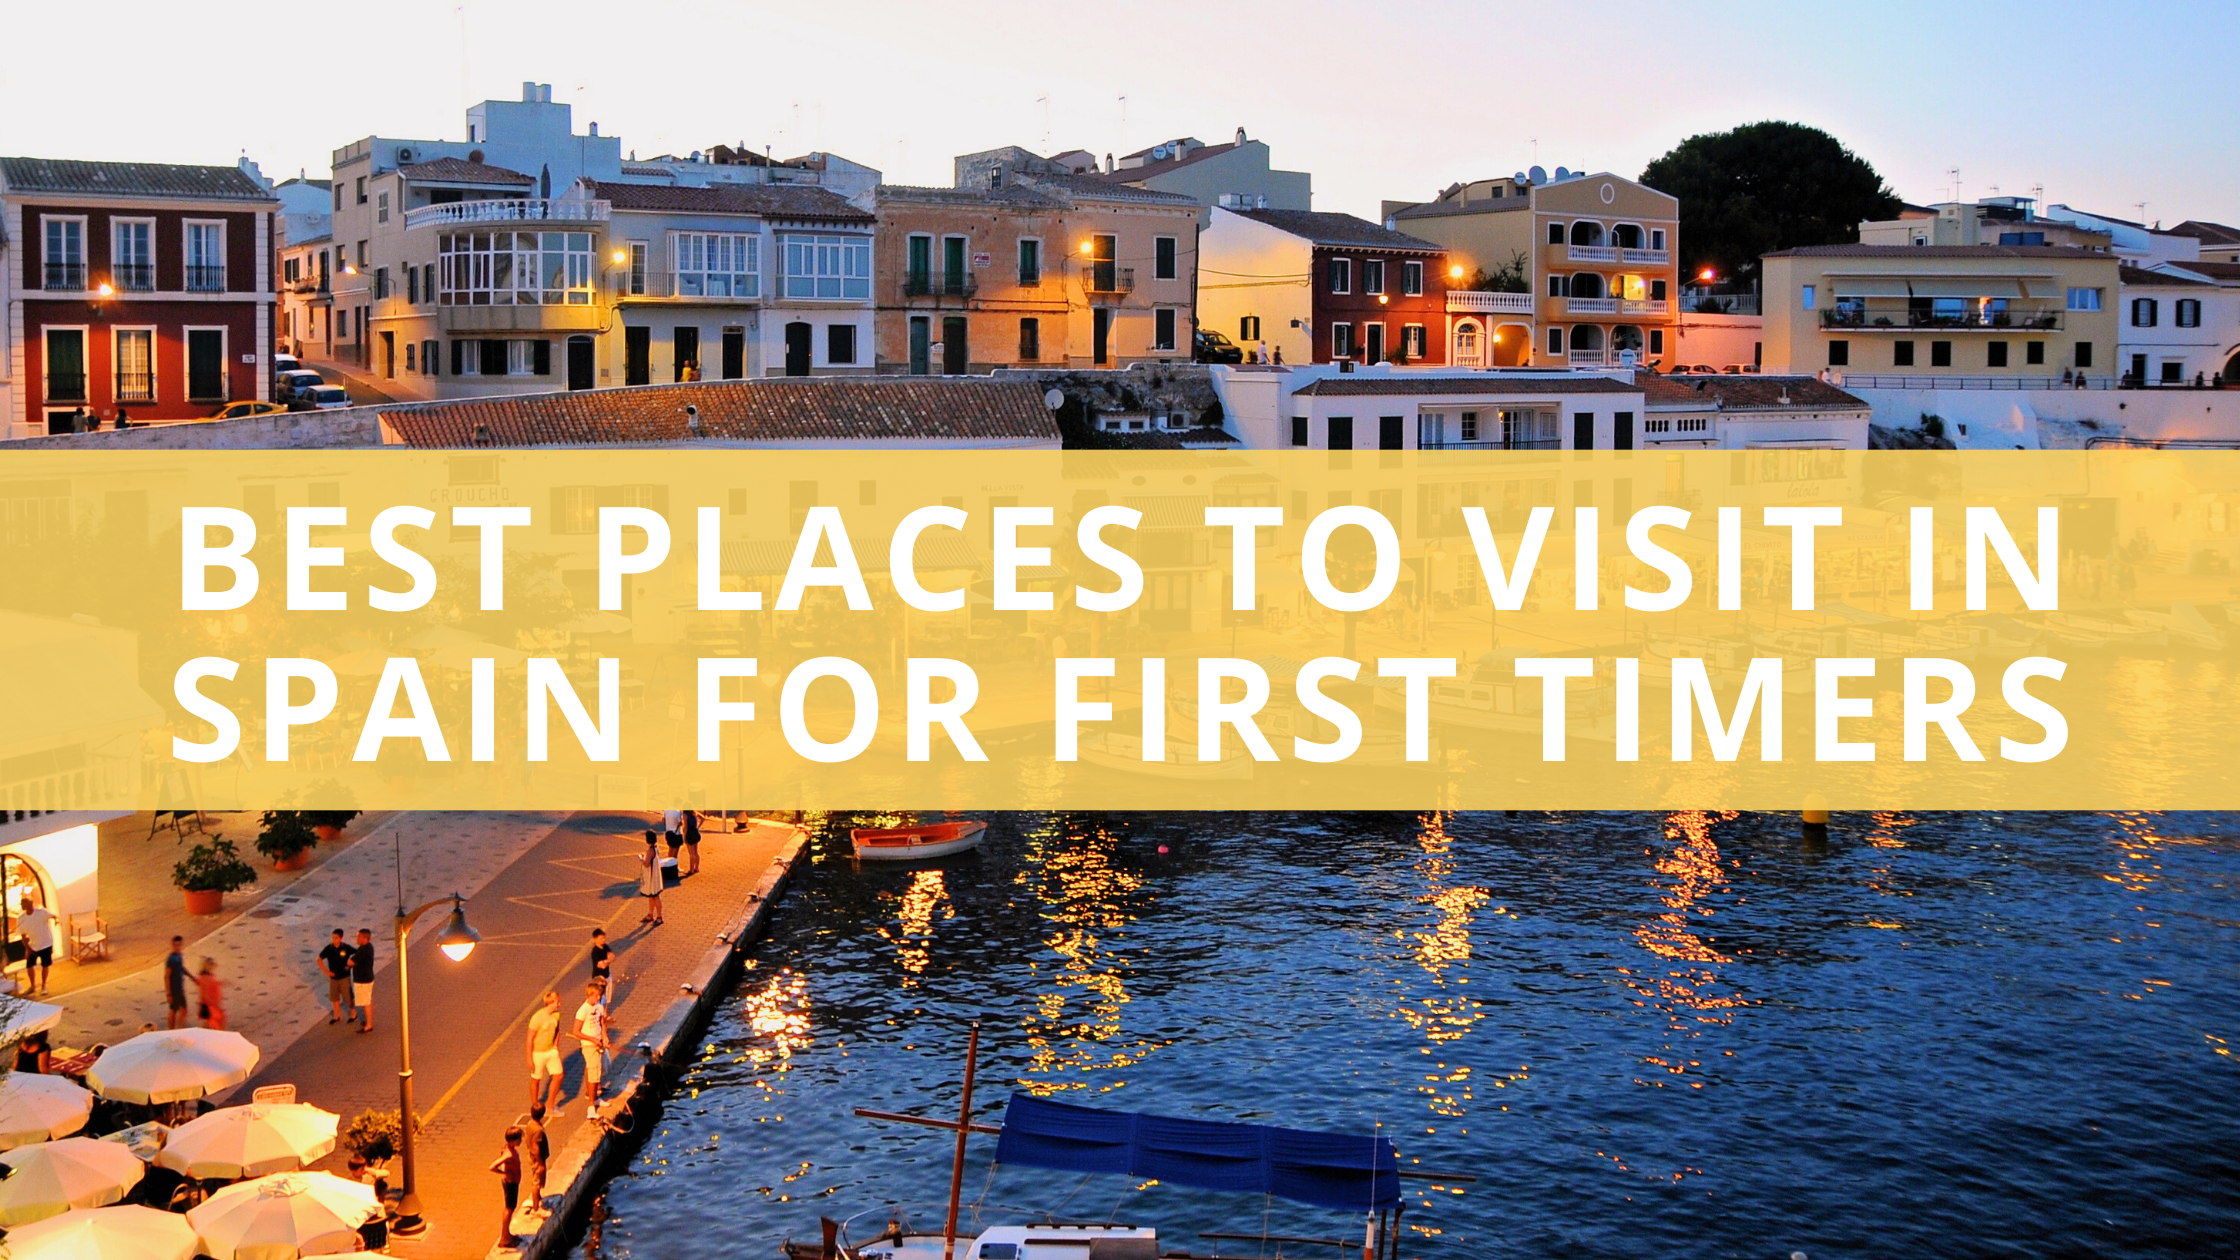 Best Places to Visit in Spain for First Timers